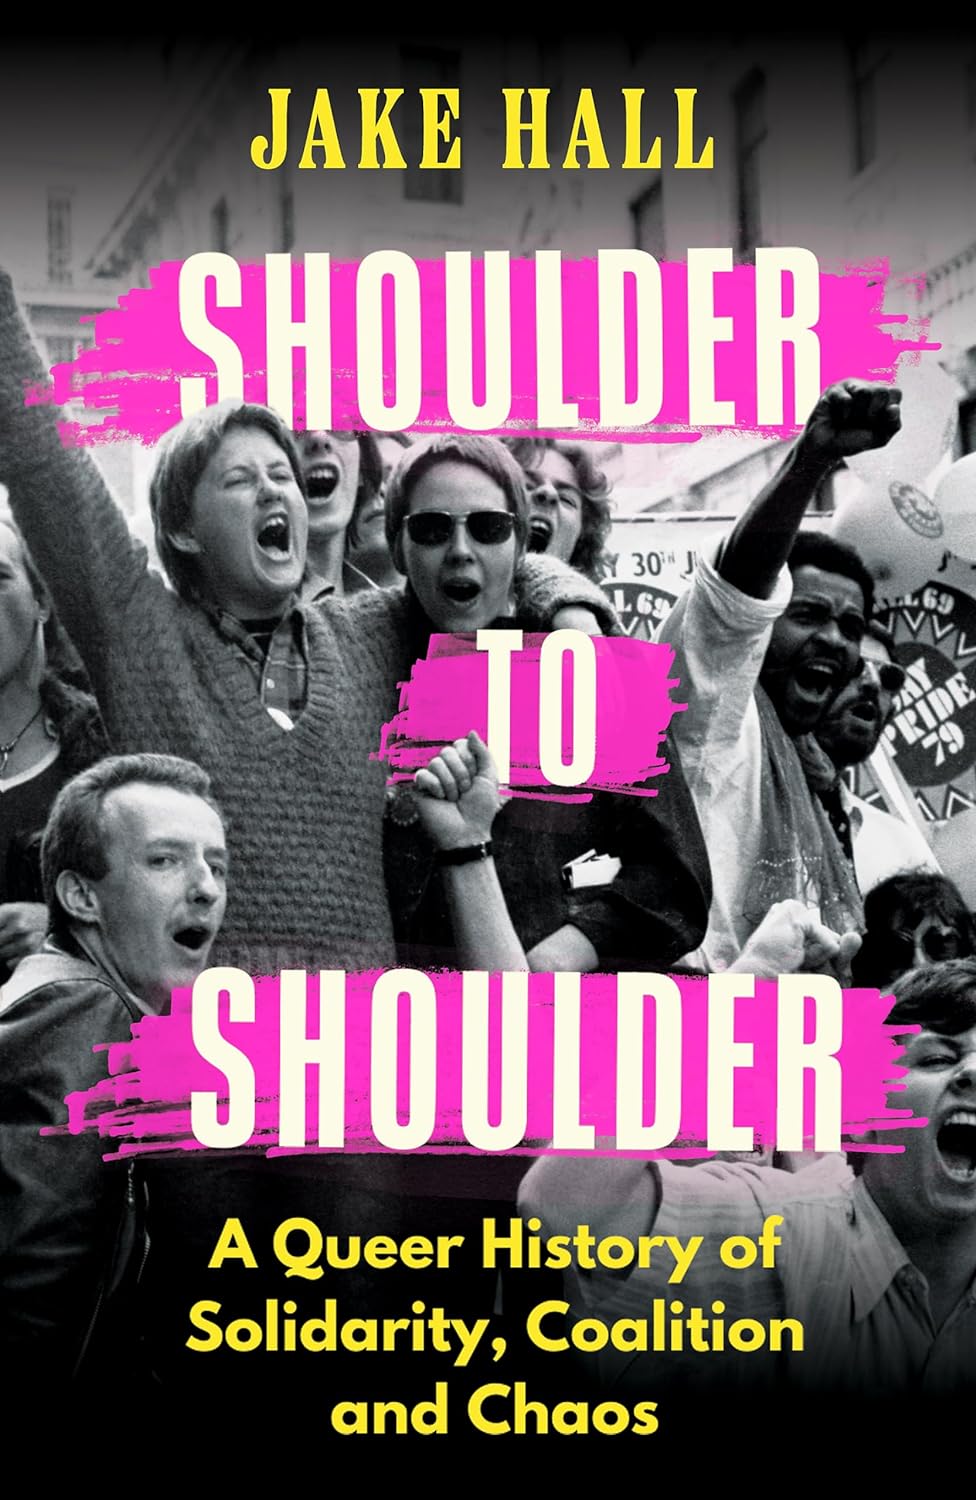 The book cover for Shoulder to Shoulder has a black and white photo of a group of black and white activists chanting. The title is written in bold white text with a pink line behind each word to help is stand out, and the author name and subtitle is written in bright yellow.